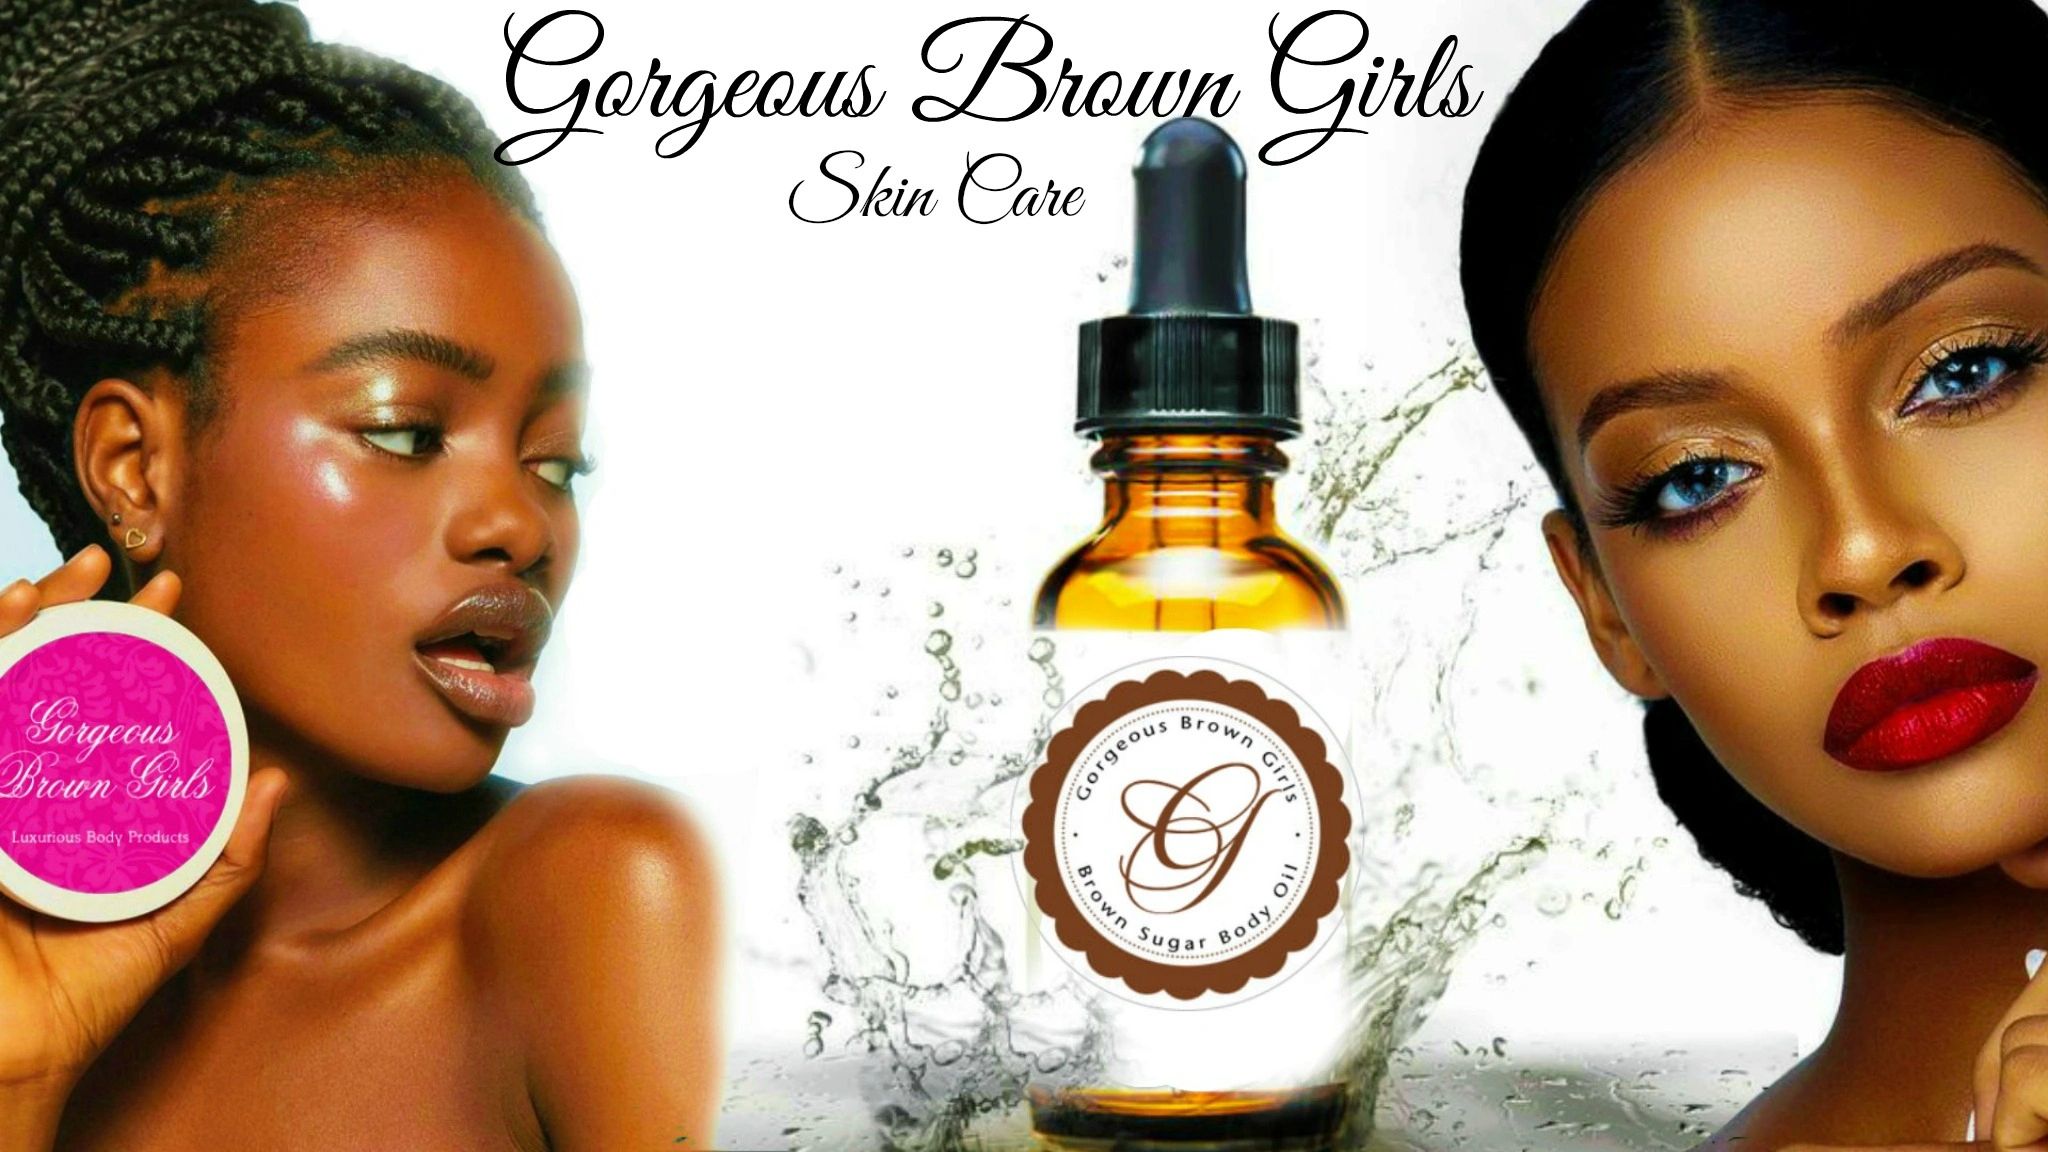 Gorgeous Brown Girls Skin Care - Home